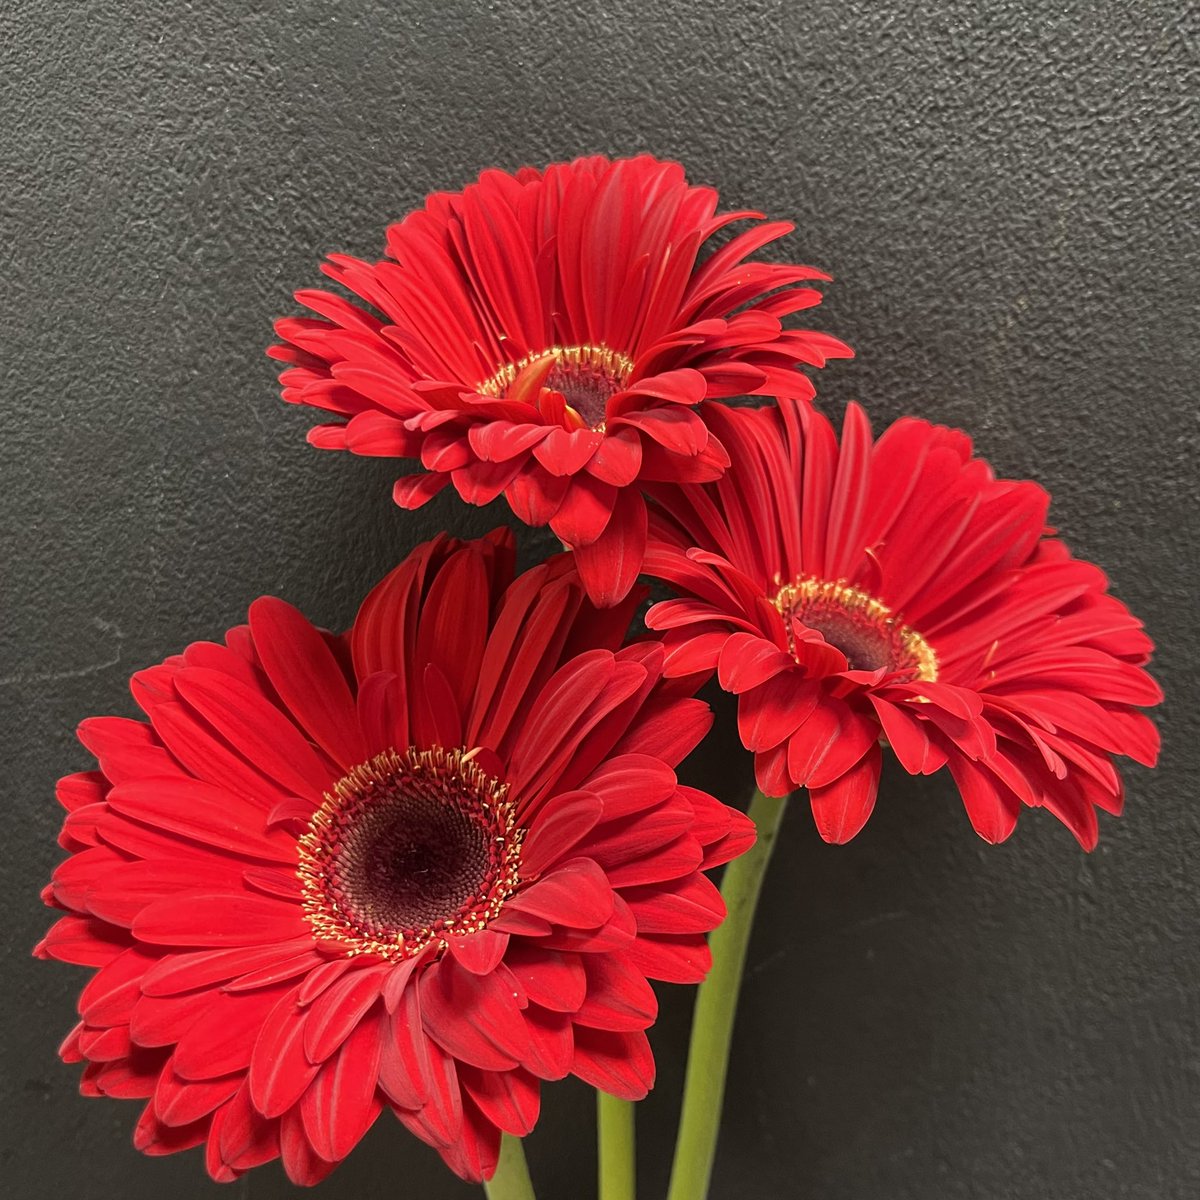 Aren’t these just darling? No really, the variety of these gerbera daisies is “Darling.”
.
.
#steinflorist #steinyourflorist #flowers #florist #flowershop #shopsmall #shoplocal #smallbusiness #phillyflorist #philadelphiaflorist #NJflorist #gerberadaisy #gerbera #daisy #darling